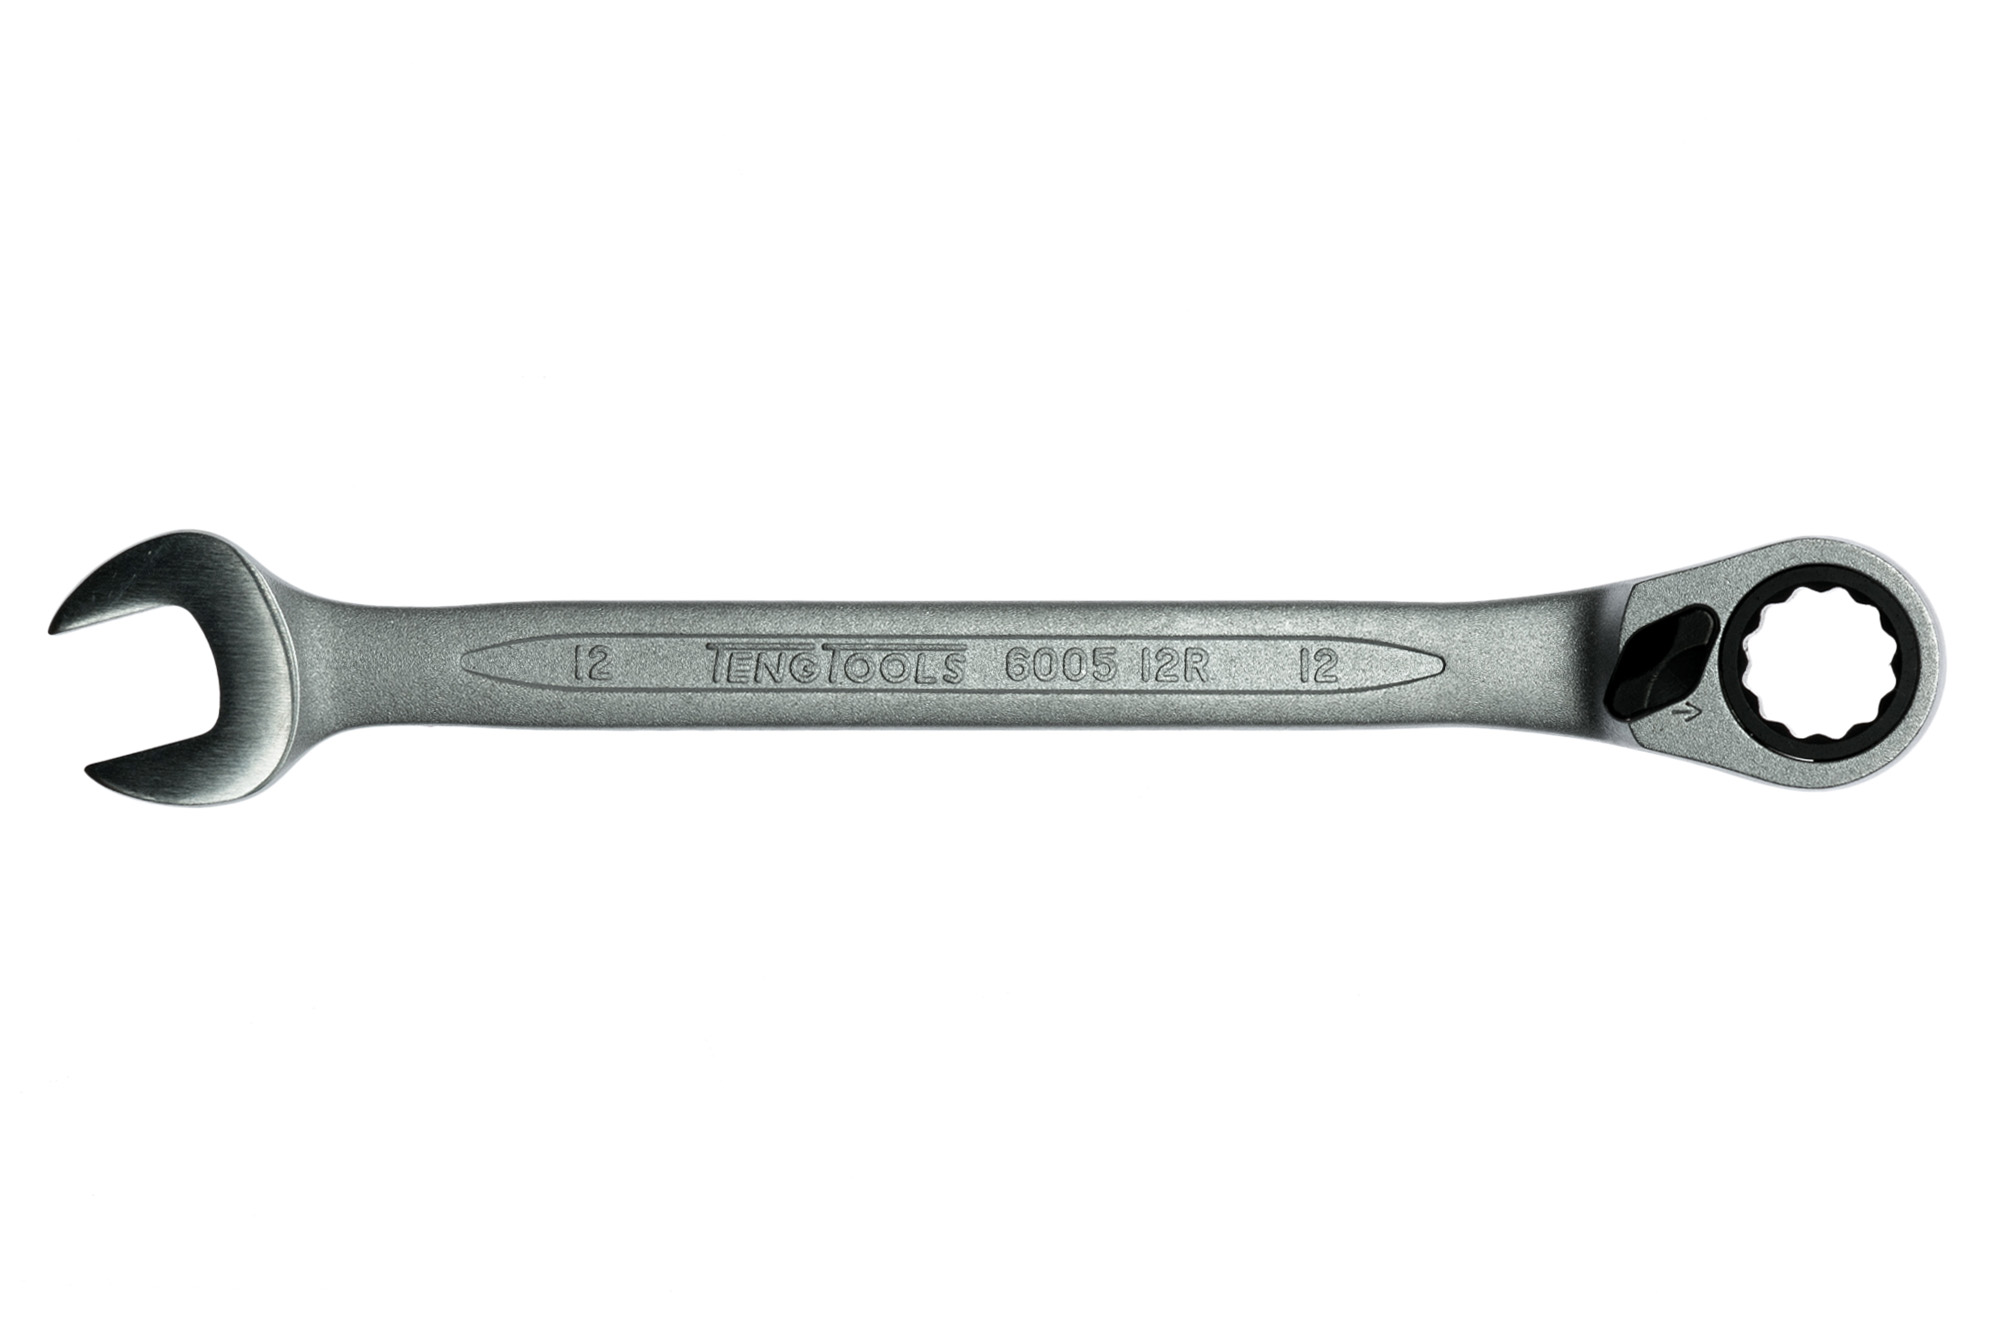 Teng Tools - 12mm Ratchet Combination Wrench - 600512R